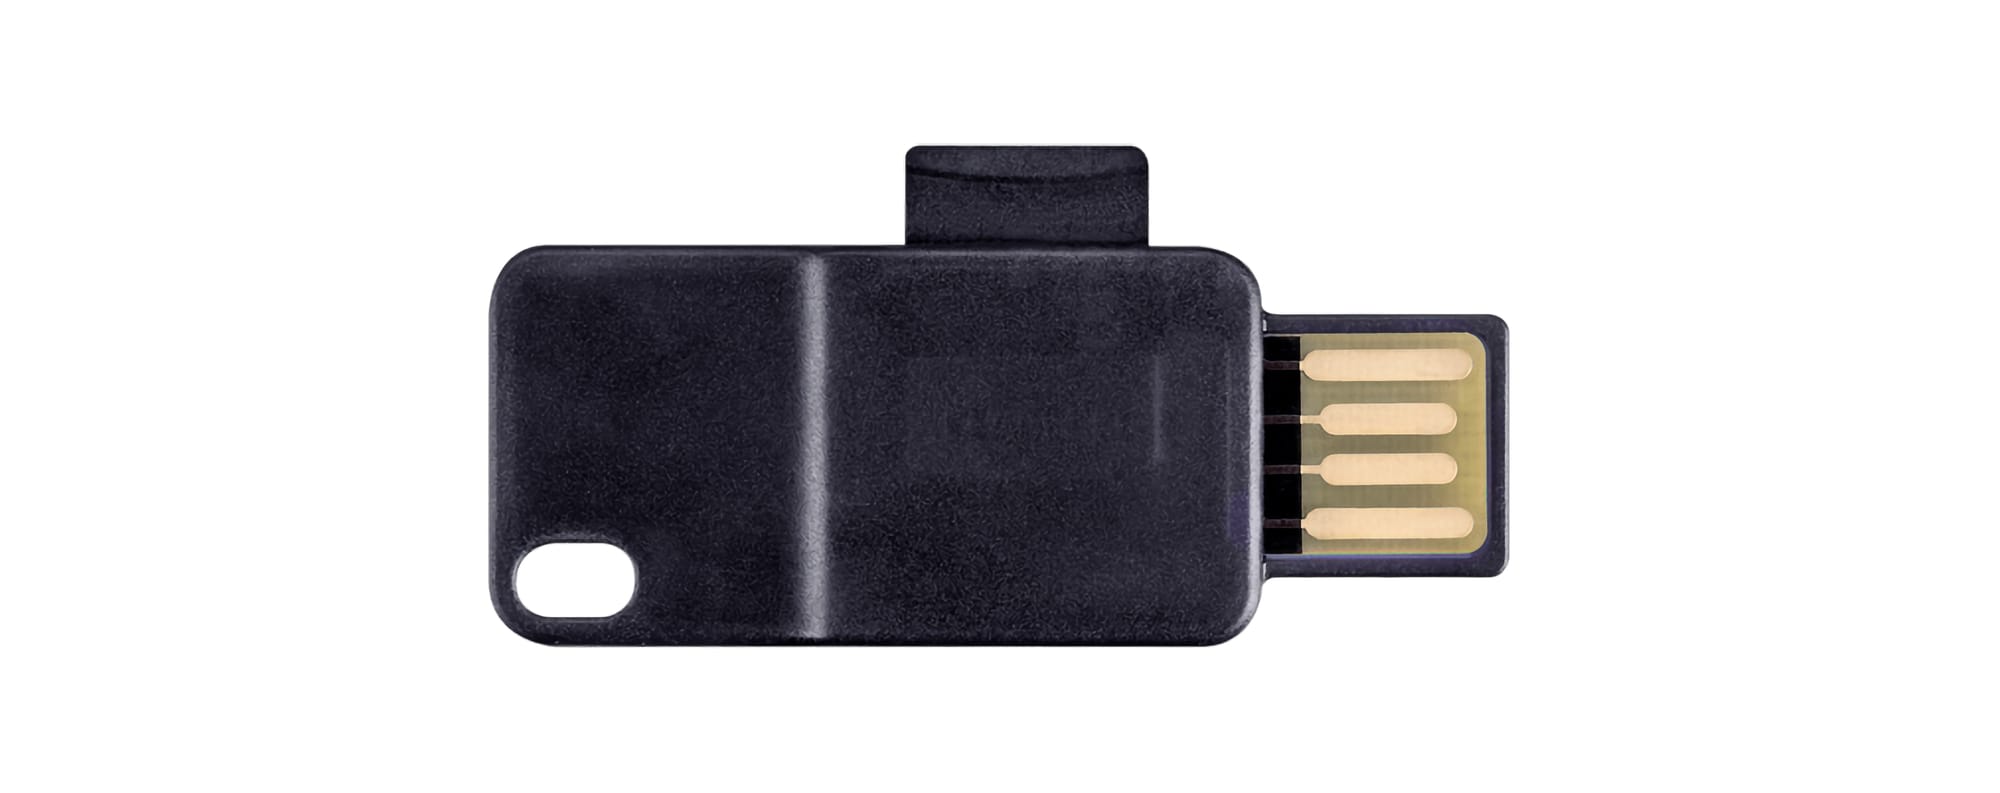 Why microSD backups should not be encrypted by default